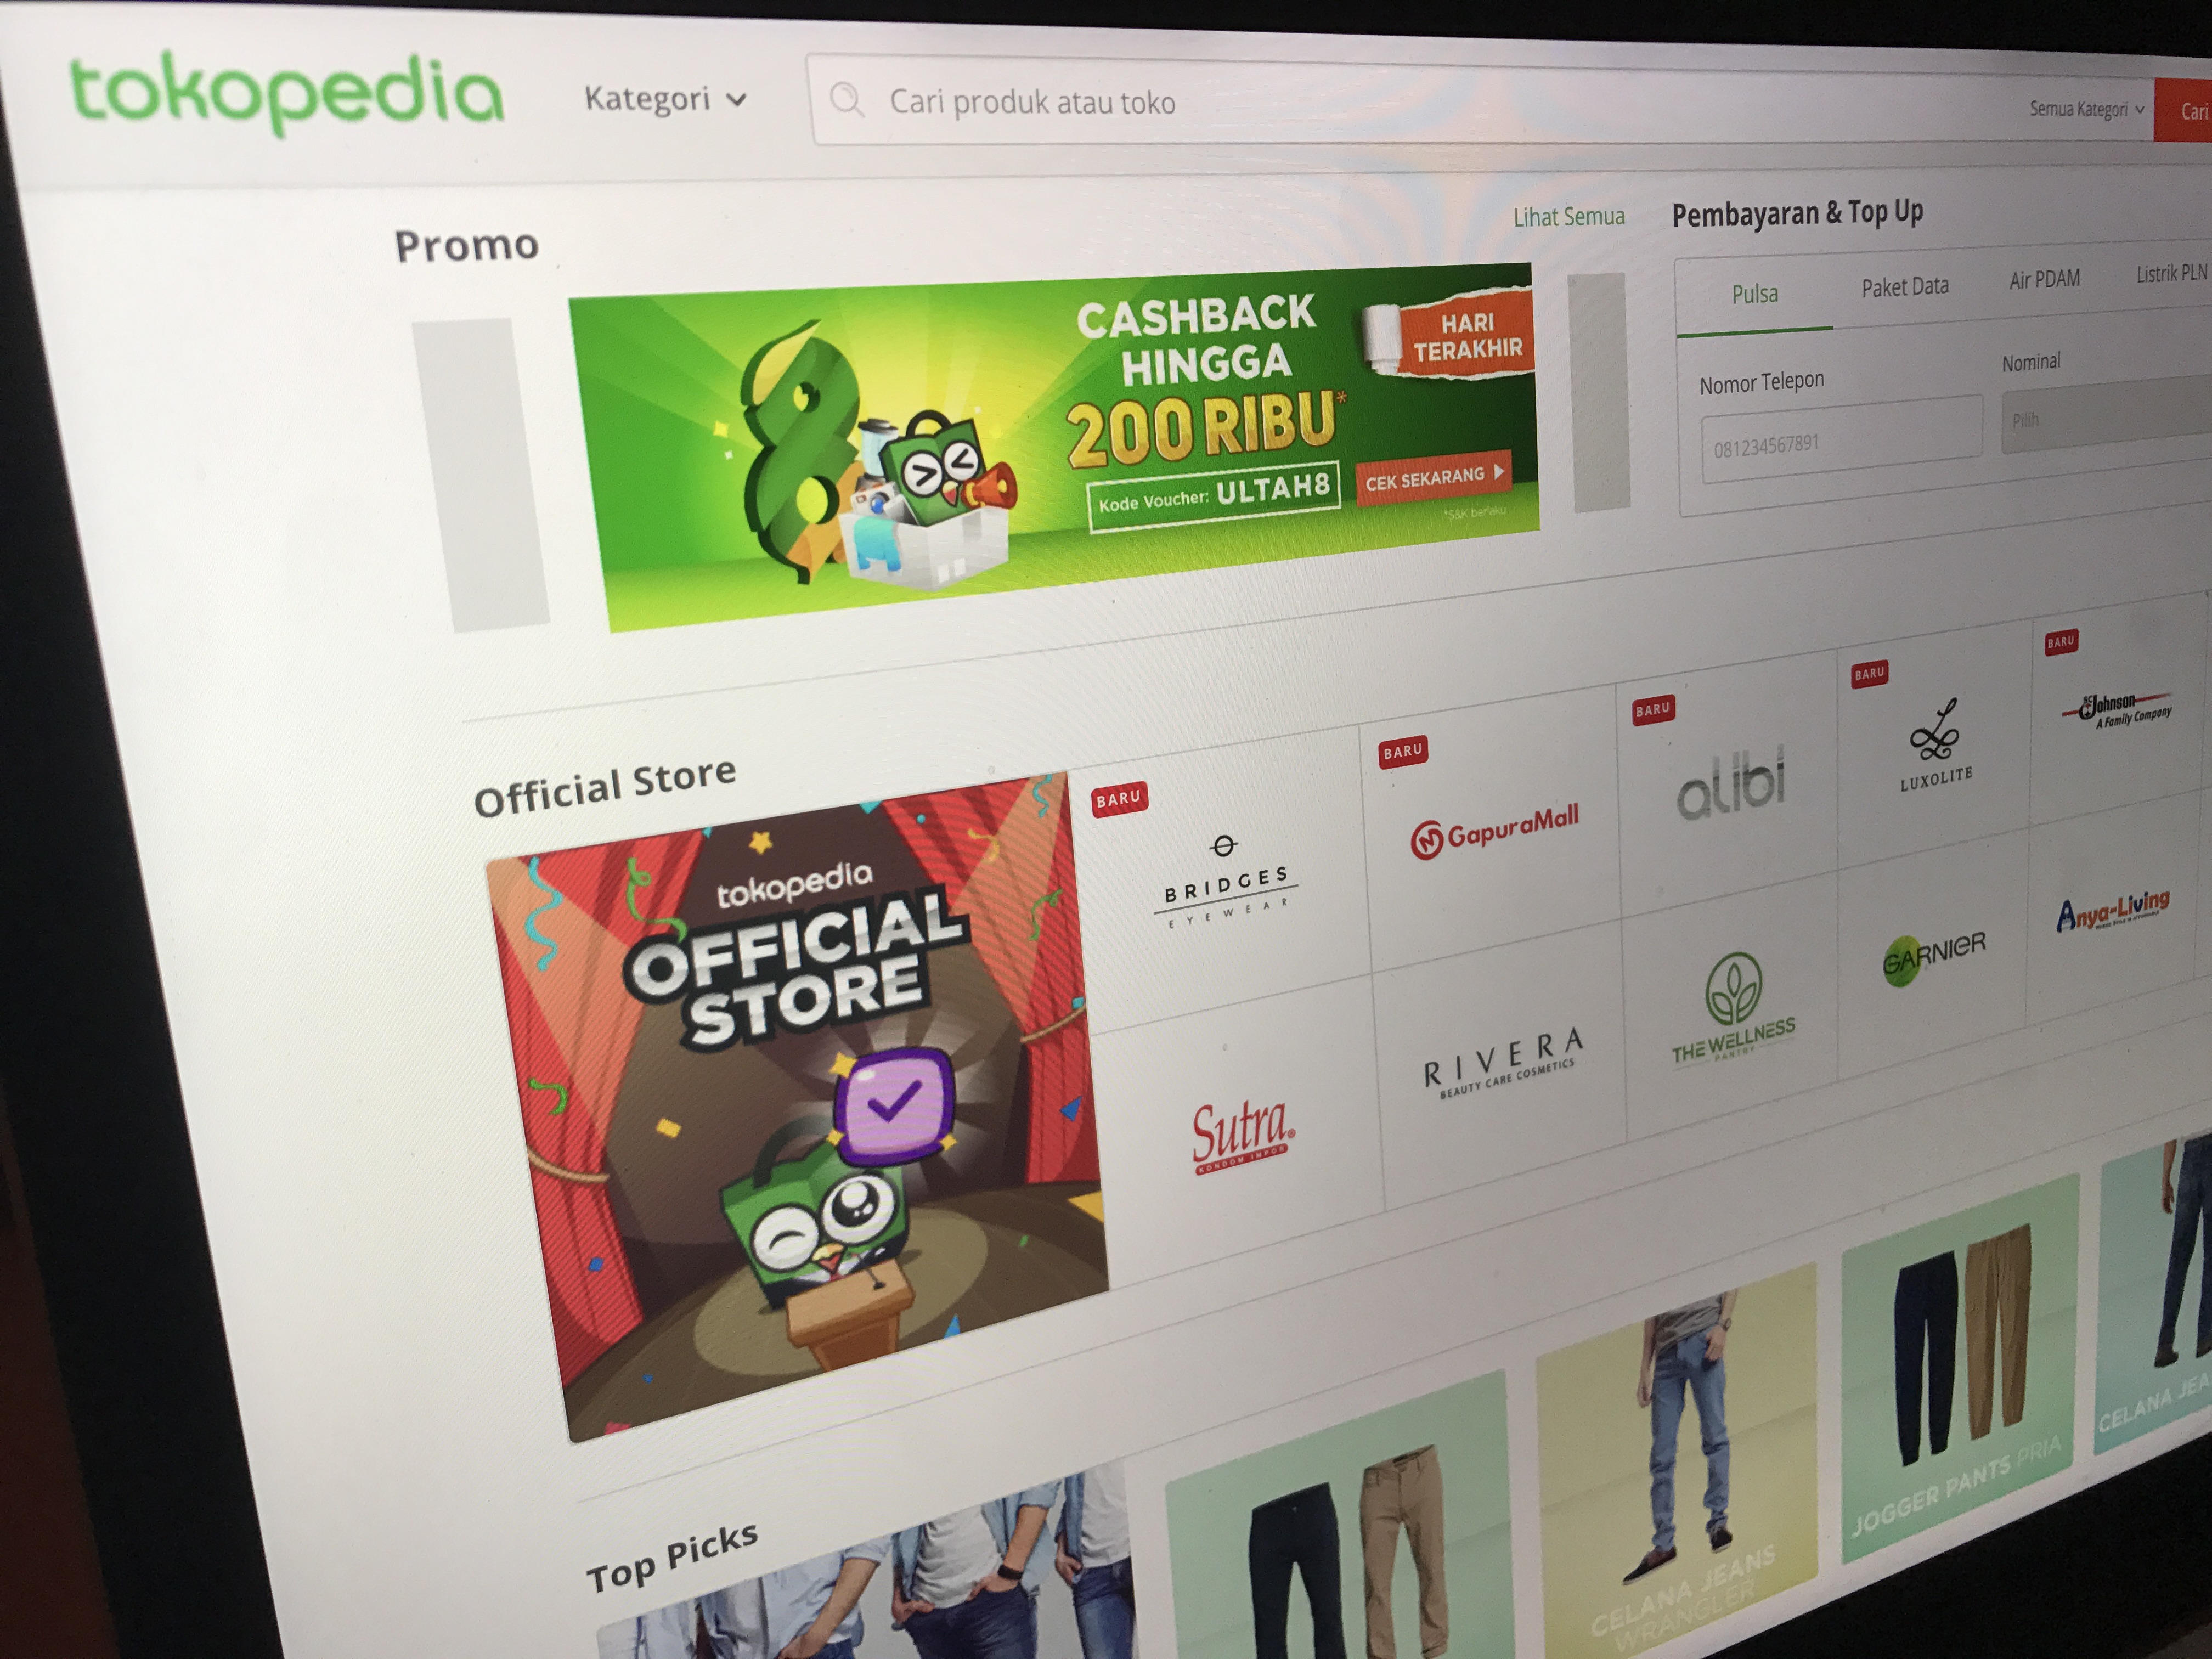 Alibaba leads $1.1B investment in Indonesia-based e-commerce firm Tokopedia